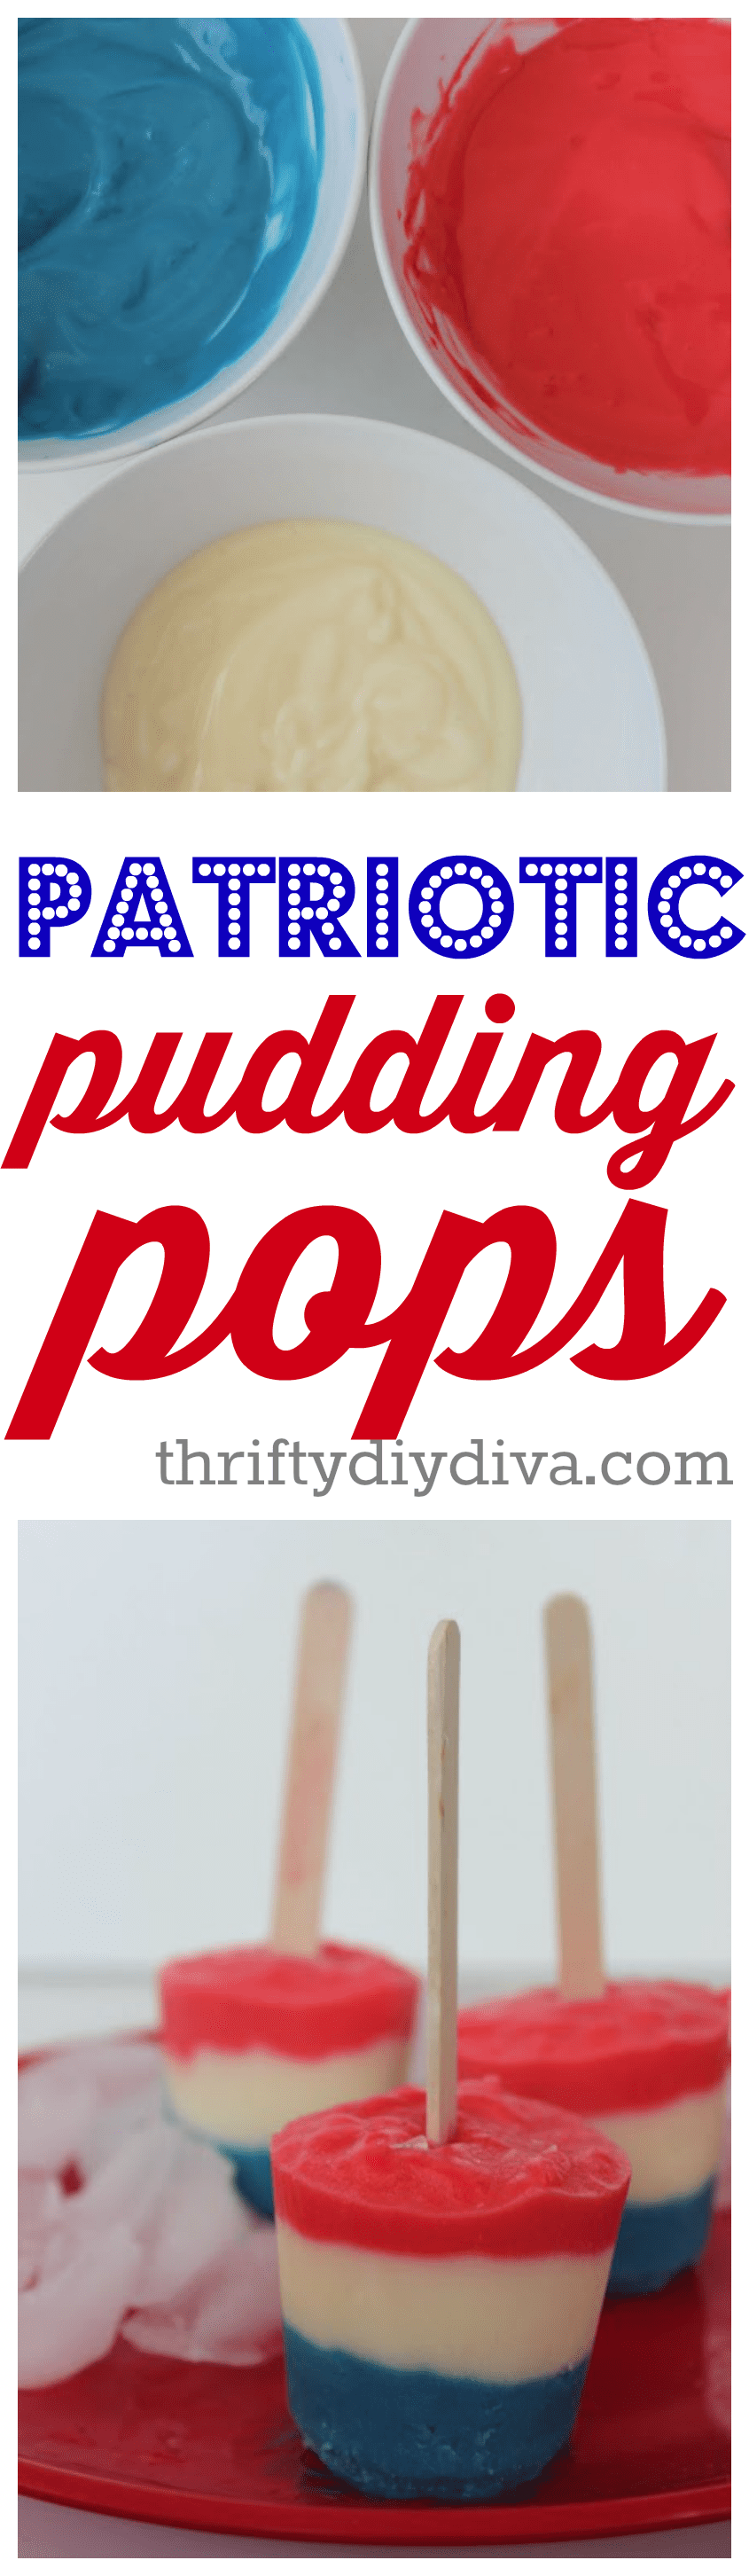 How To Make Patriotic Pudding Pops